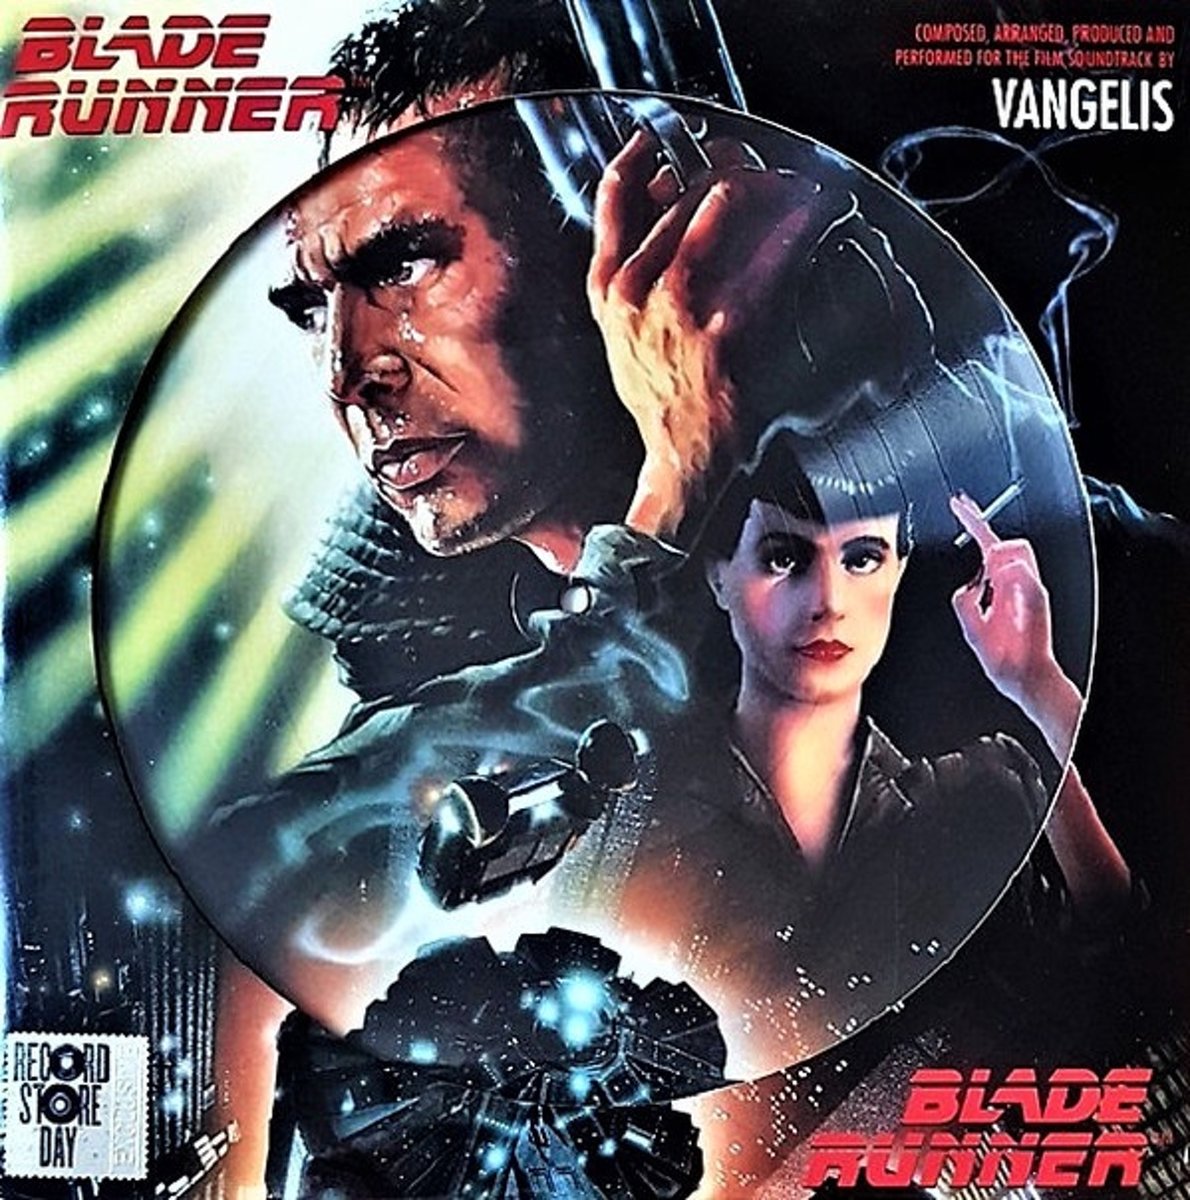 The music for Blade Runner was composed by Vangelis and its haunting, terrifying synthesiser score was nominated for a BAFTA award. The soundtrack album for Blade Runner was delayed for almost a decade, and has been sampled by many artists since.